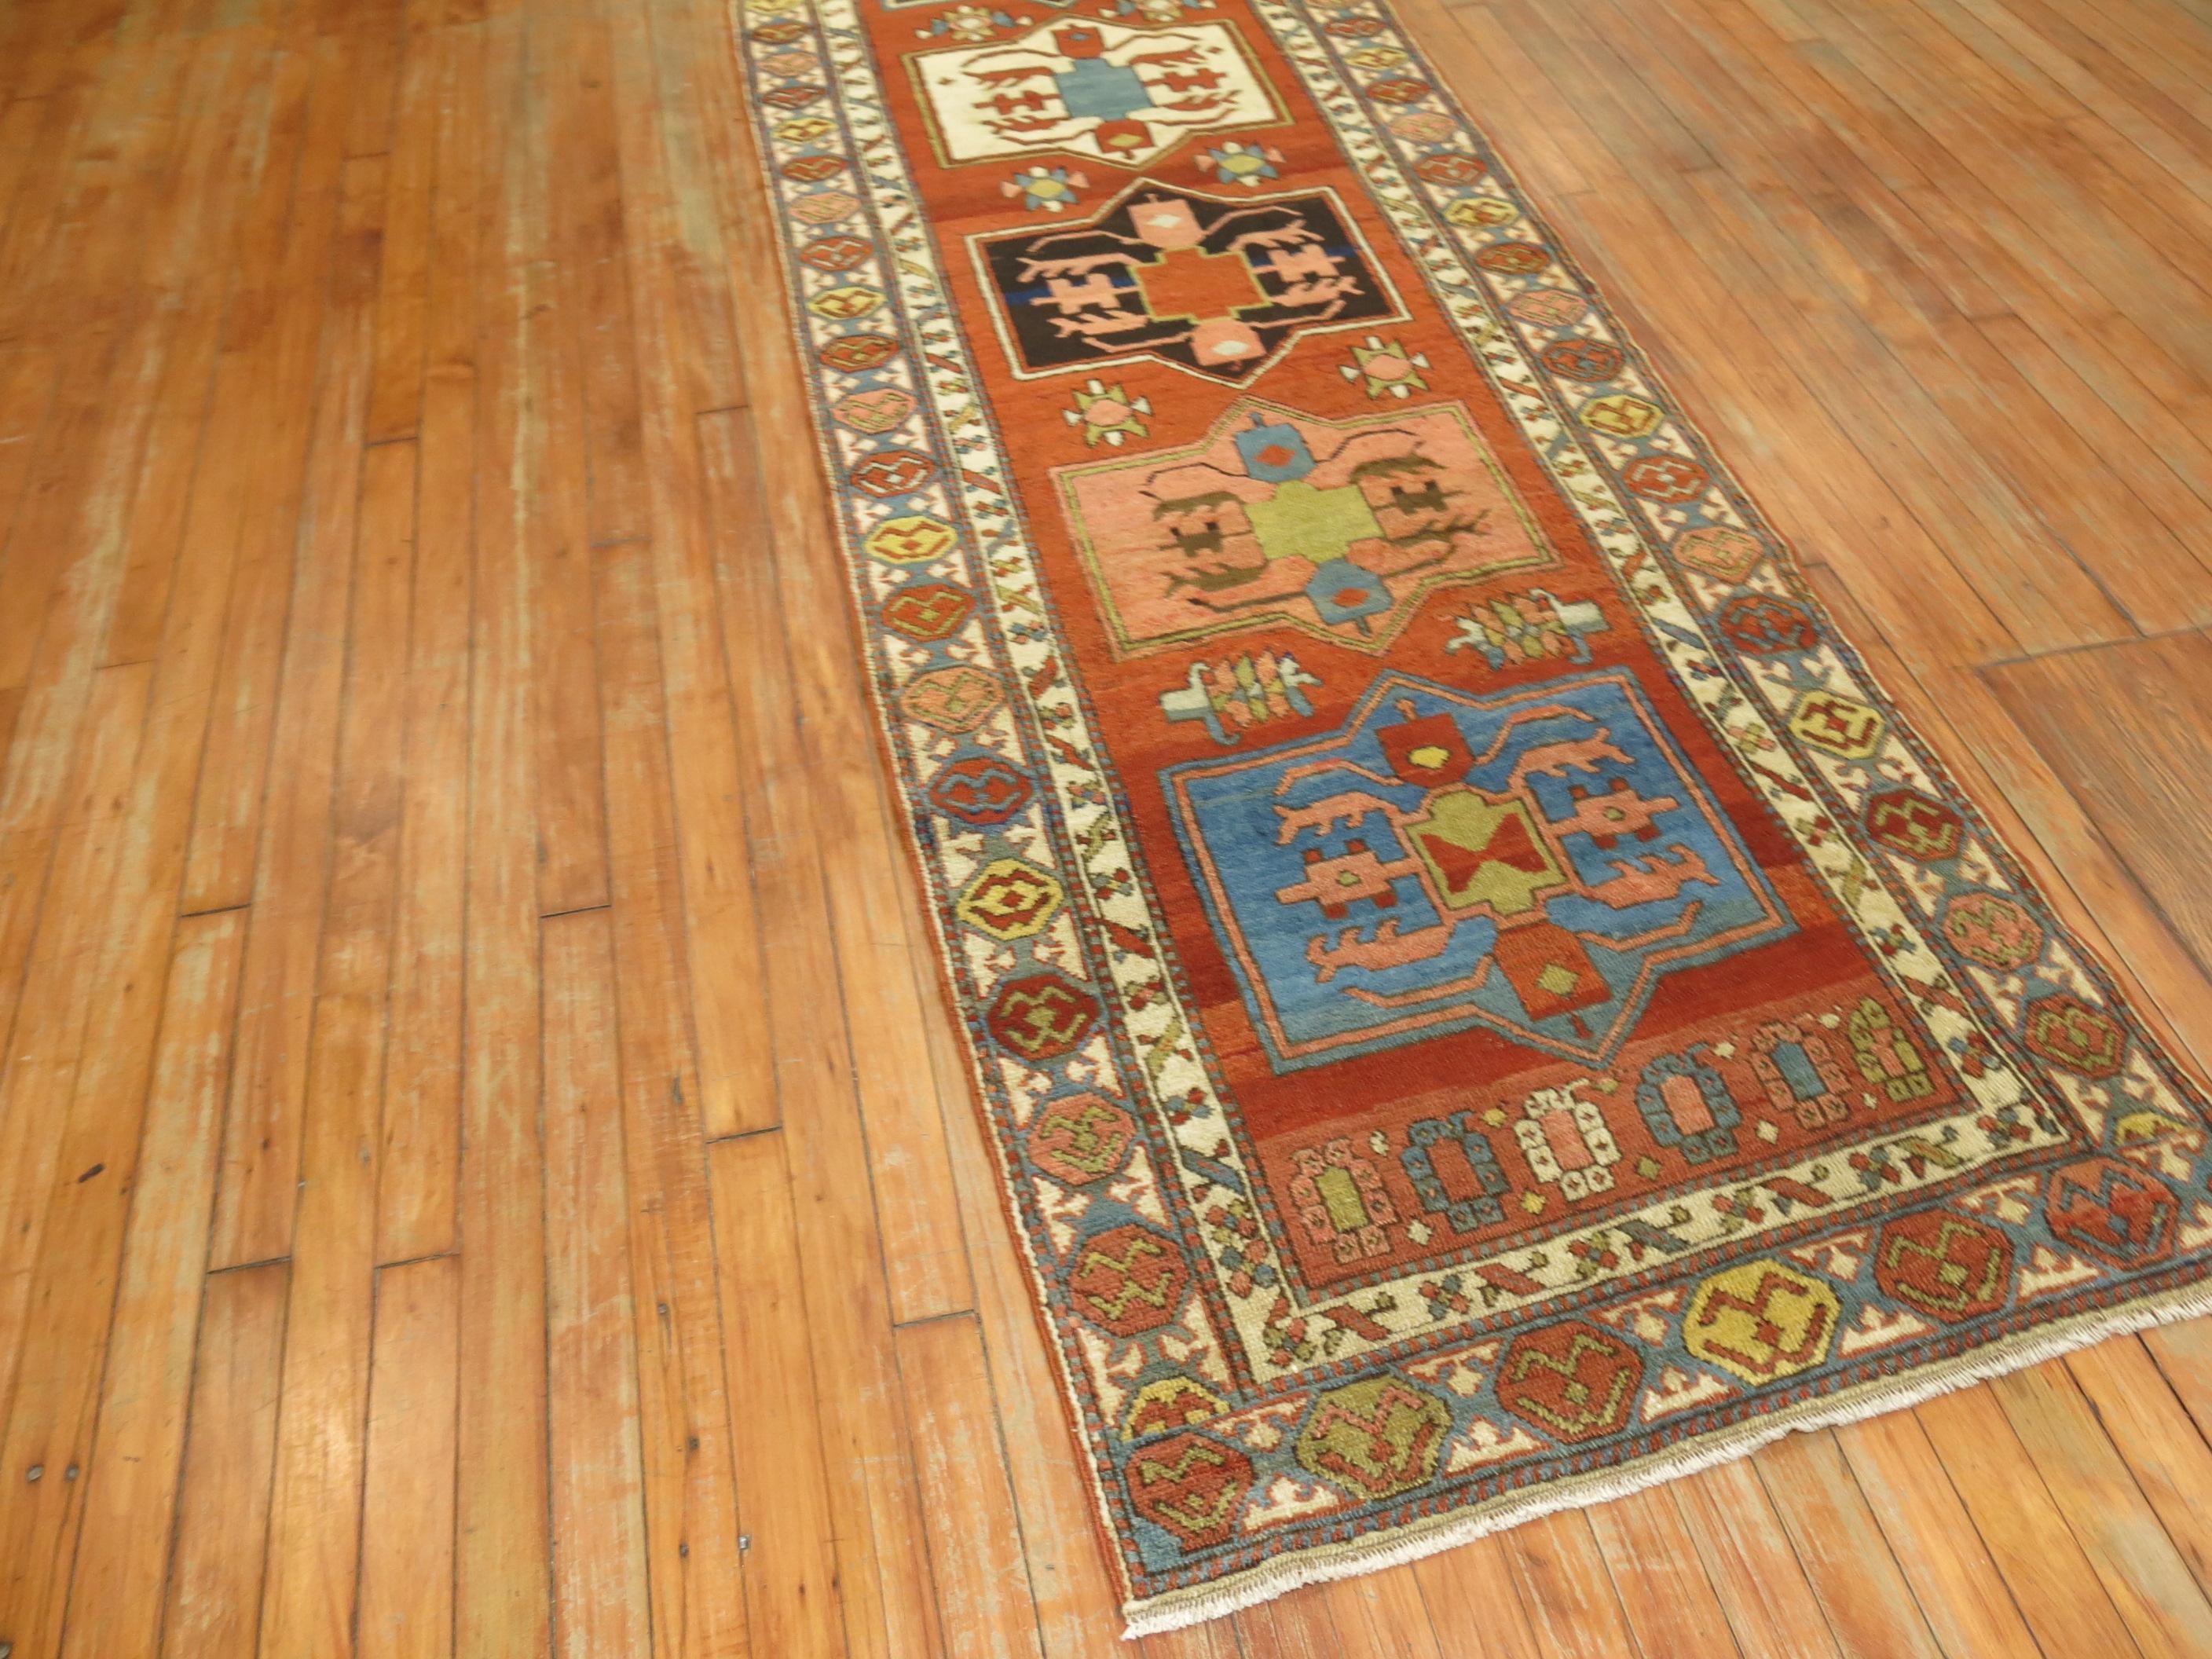 A high quality early 20th century northwest Persian runner. A brick field with open medallions in an array of earthy colors.